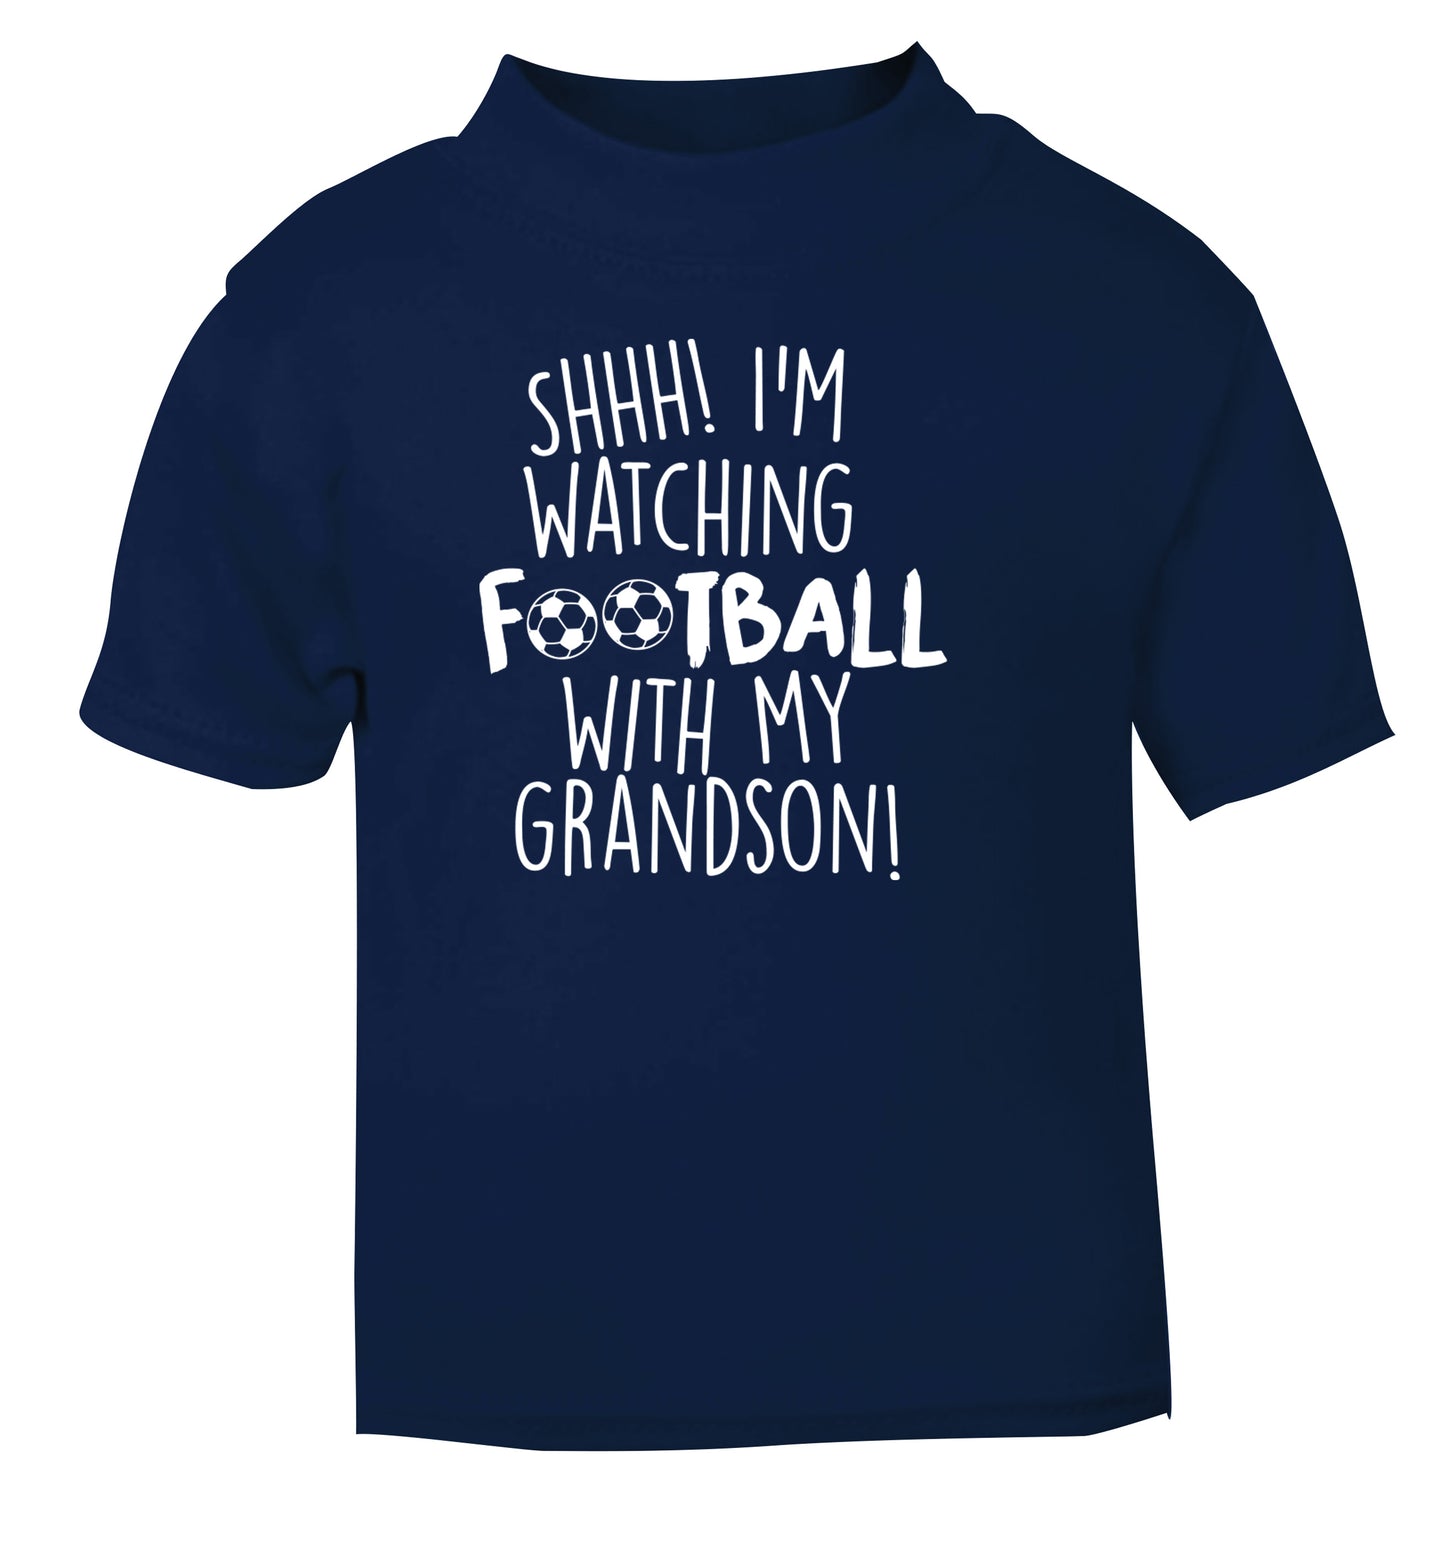 Shhh I'm watching football with my grandson navy Baby Toddler Tshirt 2 Years